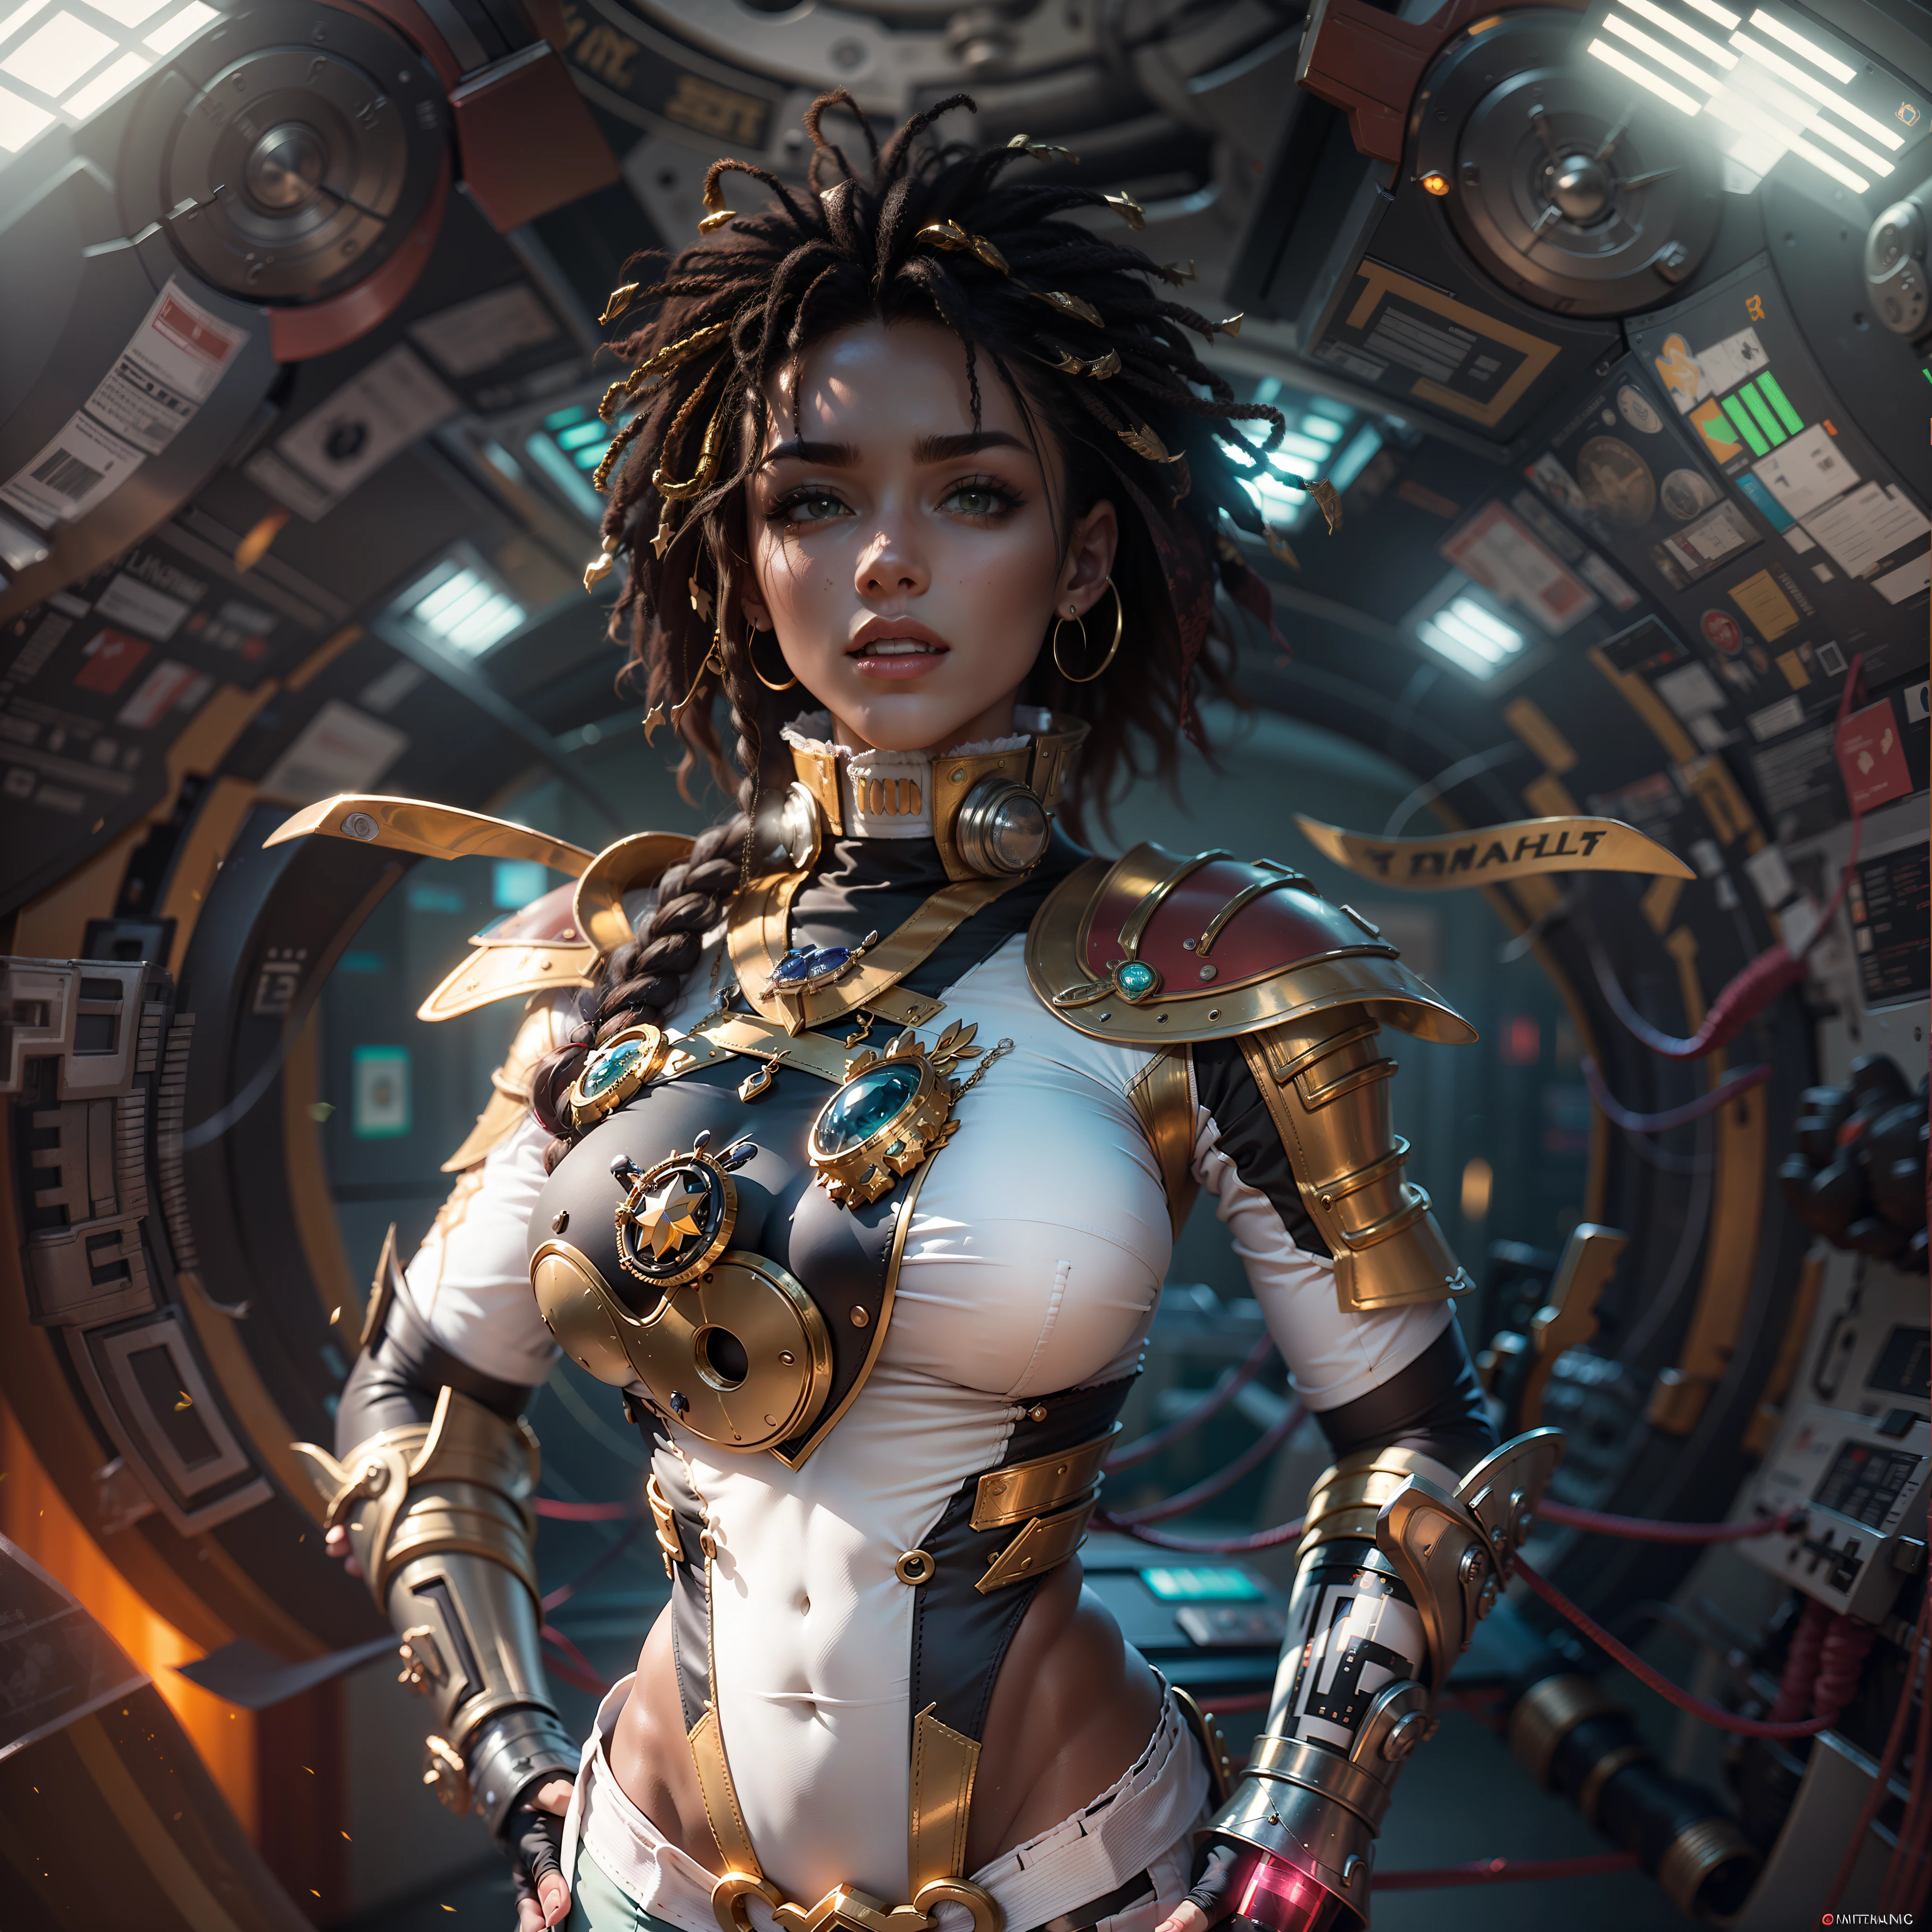 Masterpiece Galaxy female sexual lovely fullbody The_Manned_Maneuvering_Unit (MMU) outfits astronaut girl, propulsion jet-pack missile shot outdoor UNITED STATES Flag Goddess Conceptual contre-jours onyx Star Sun space Station Port War Will-o'-the-wisp Deep Ship, Pilots "Heavy metal" Devastating cyberpunk mature "Luis Royo" dazzling Admiral Marshall richly decorated star Cosplay Royale native Africa "Celia Rose" women "Celia Rose Gooding" cow-girl "Nyota Uhura" sundrop ultra_Sharpness intricate ultra pro-photorealists optimal ultra high_quality perfection Accuracy reflexes ultra highRes detailed max volumetric graduate netteté improved Octane_render number_rendues UHD XT3 K 32K 16K 8K DSLR HDR unrealengine5 saturate shadow analogique 3dcg symmetrical sexy body athletic skin tanned saharian african hairstyle dreads kilimandjaro epic face cheekbones effects embarrassed redderer eyeliner indigo beautiful eyes sapphires dark pupils black brown retina lazulis iris turquoises mouth open teeth obvious smiles fringes ecstatic floating jacket quirky fixed eccentric cape levitating shoulders-off shirt lace clavicles white papillotes embroidered breasts points satin corsait sundrop thick felther felt skirt matching spinels loose swinging navel waist revealing belts-Chastity heart diamond padlock Gold decorated silver agate pubis reveal scarlet pubis-hairy silks garters snaps thighs legs boots stainless steel gothic thick onyx, magic ruby invokes Bees incandescent CGSCOSITY flowering invoke Bees monster equirectangular background 360 Crystalline hearth Queen_Bee Micro Recorder flash (EOS R6 135mm 1/1250s f/2.8 ISO400) Phaser shoot Mechanic Canon-ion opale, mannequins dramatic glass straight armor heavy chrome flat sensor Luminescence rune lava bands antenna engravings Tourmaline glyph plasma fathoms brass chef-d&#39 Michelangelo armoirie earth navy tattoo "Bruce Weber" sex girls naked nsfw varied multi etc.